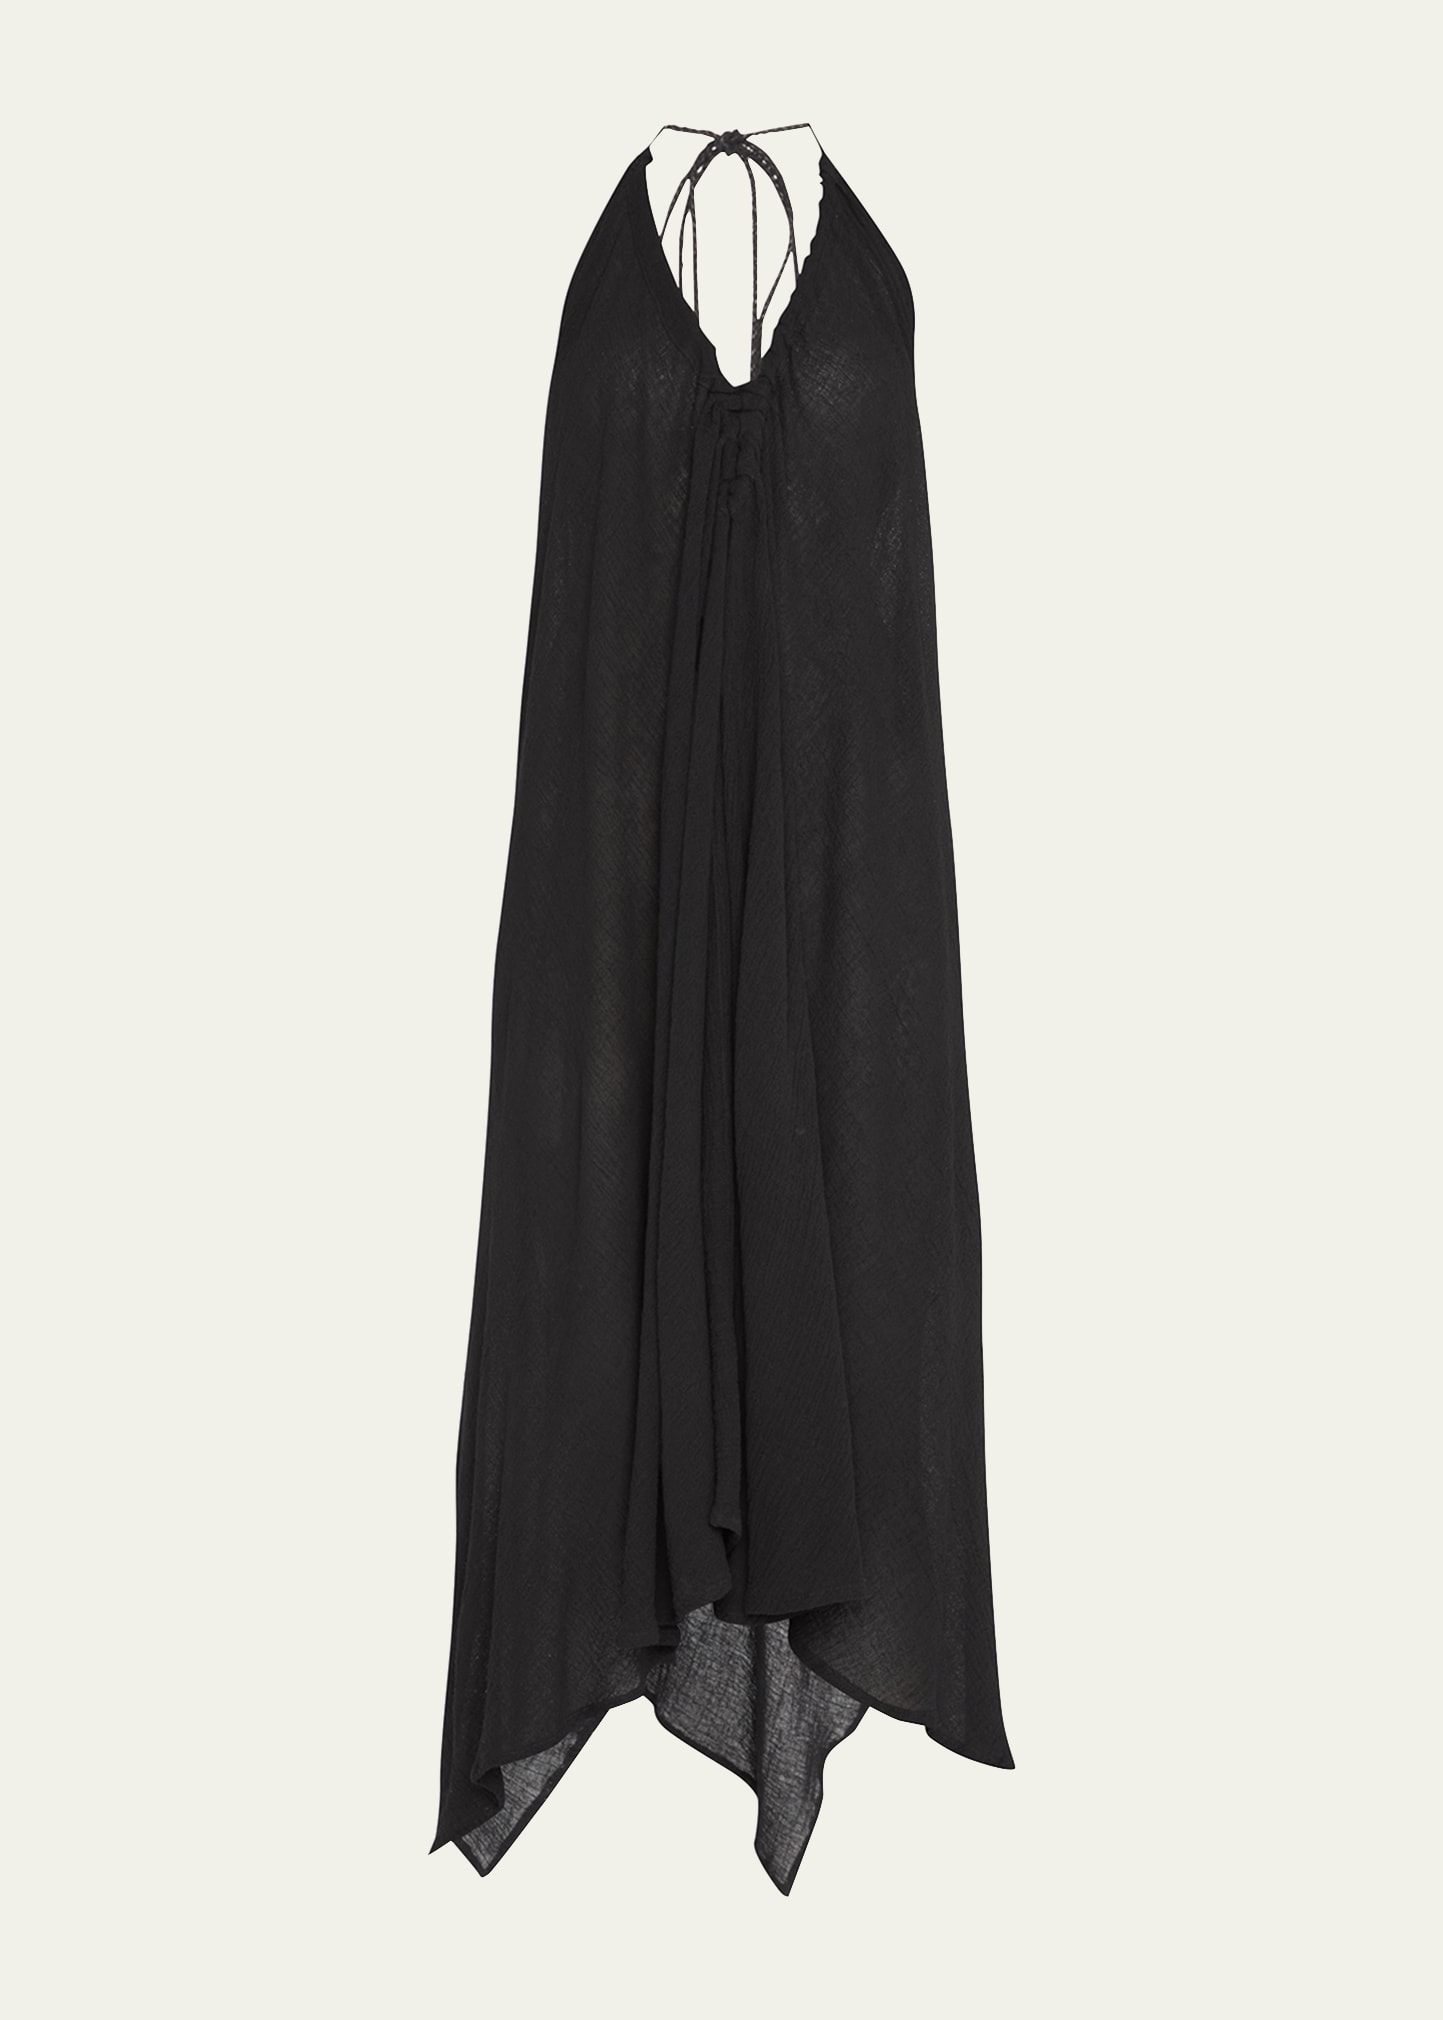 Ayikal Halter Maxi Dress with Calf Leather Straps